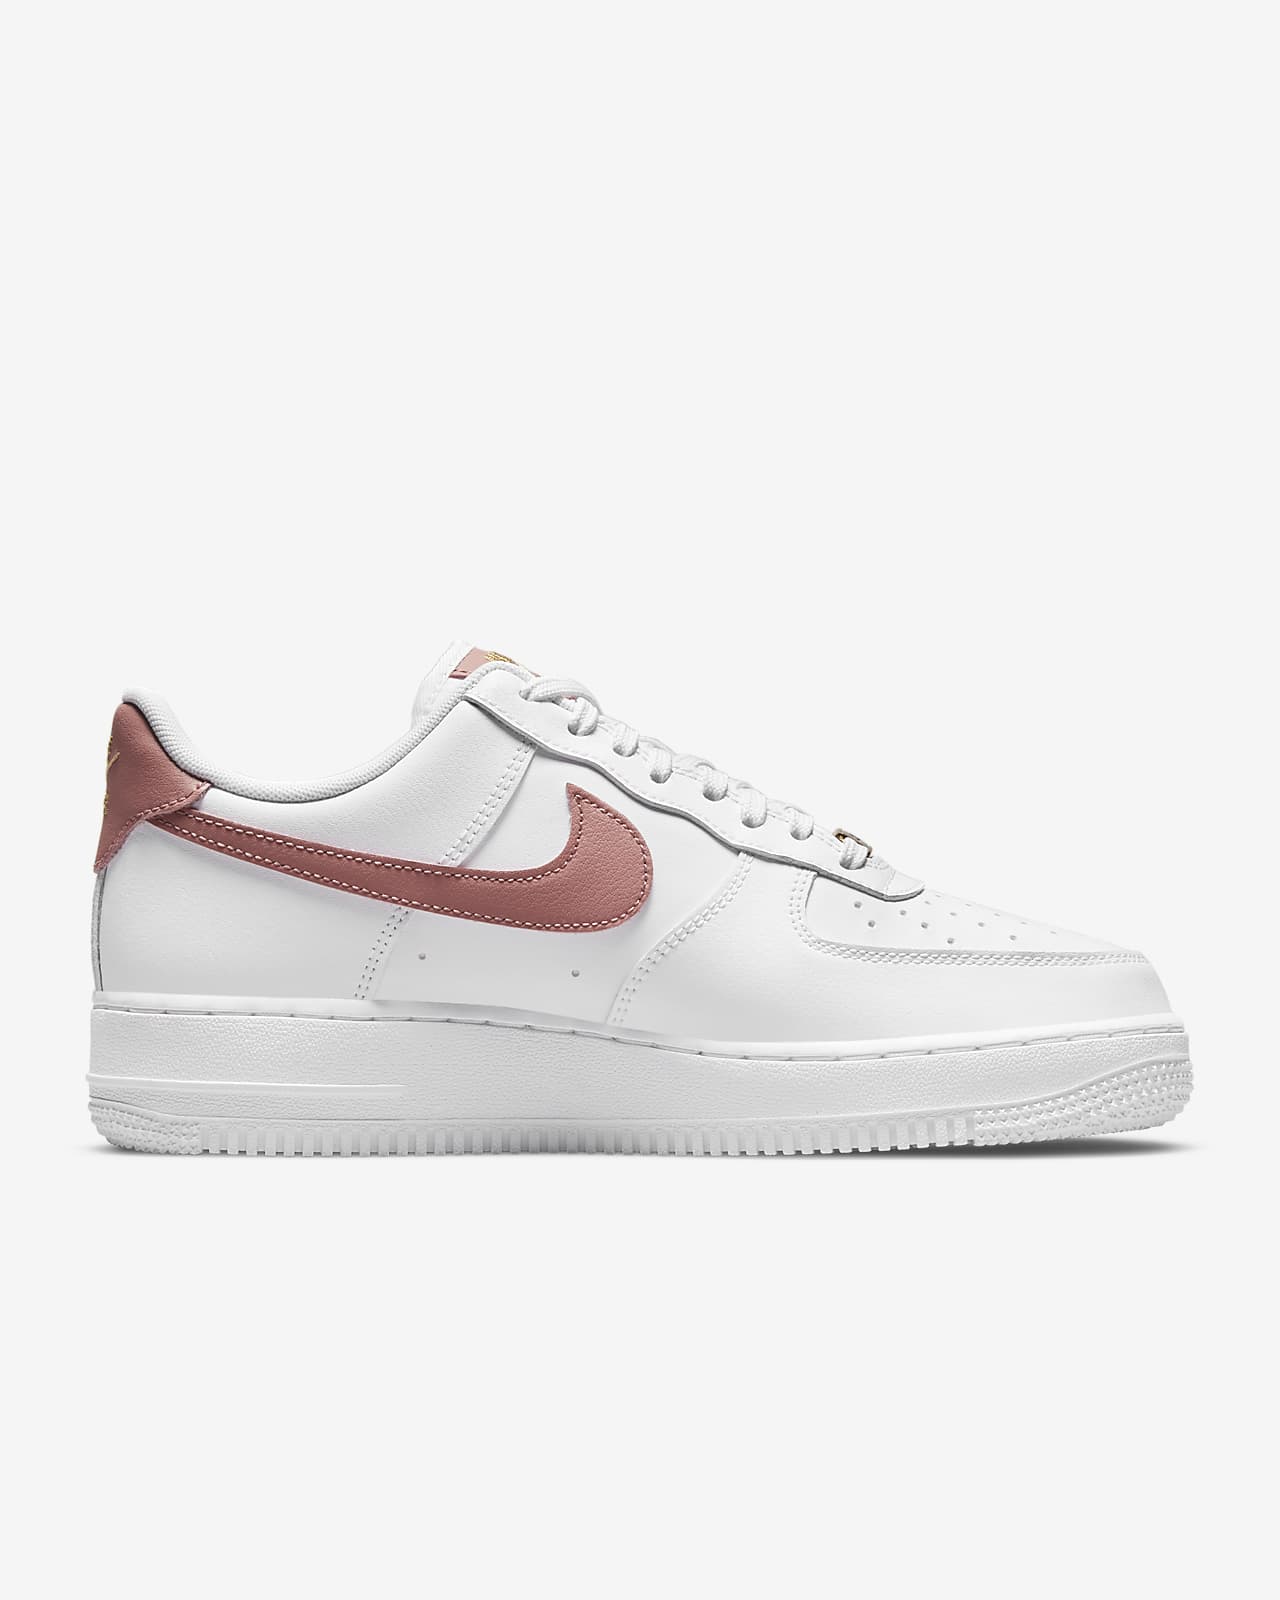 video spin Painkiller Nike Air Force 1 '07 Essential Women's Shoes. Nike JP